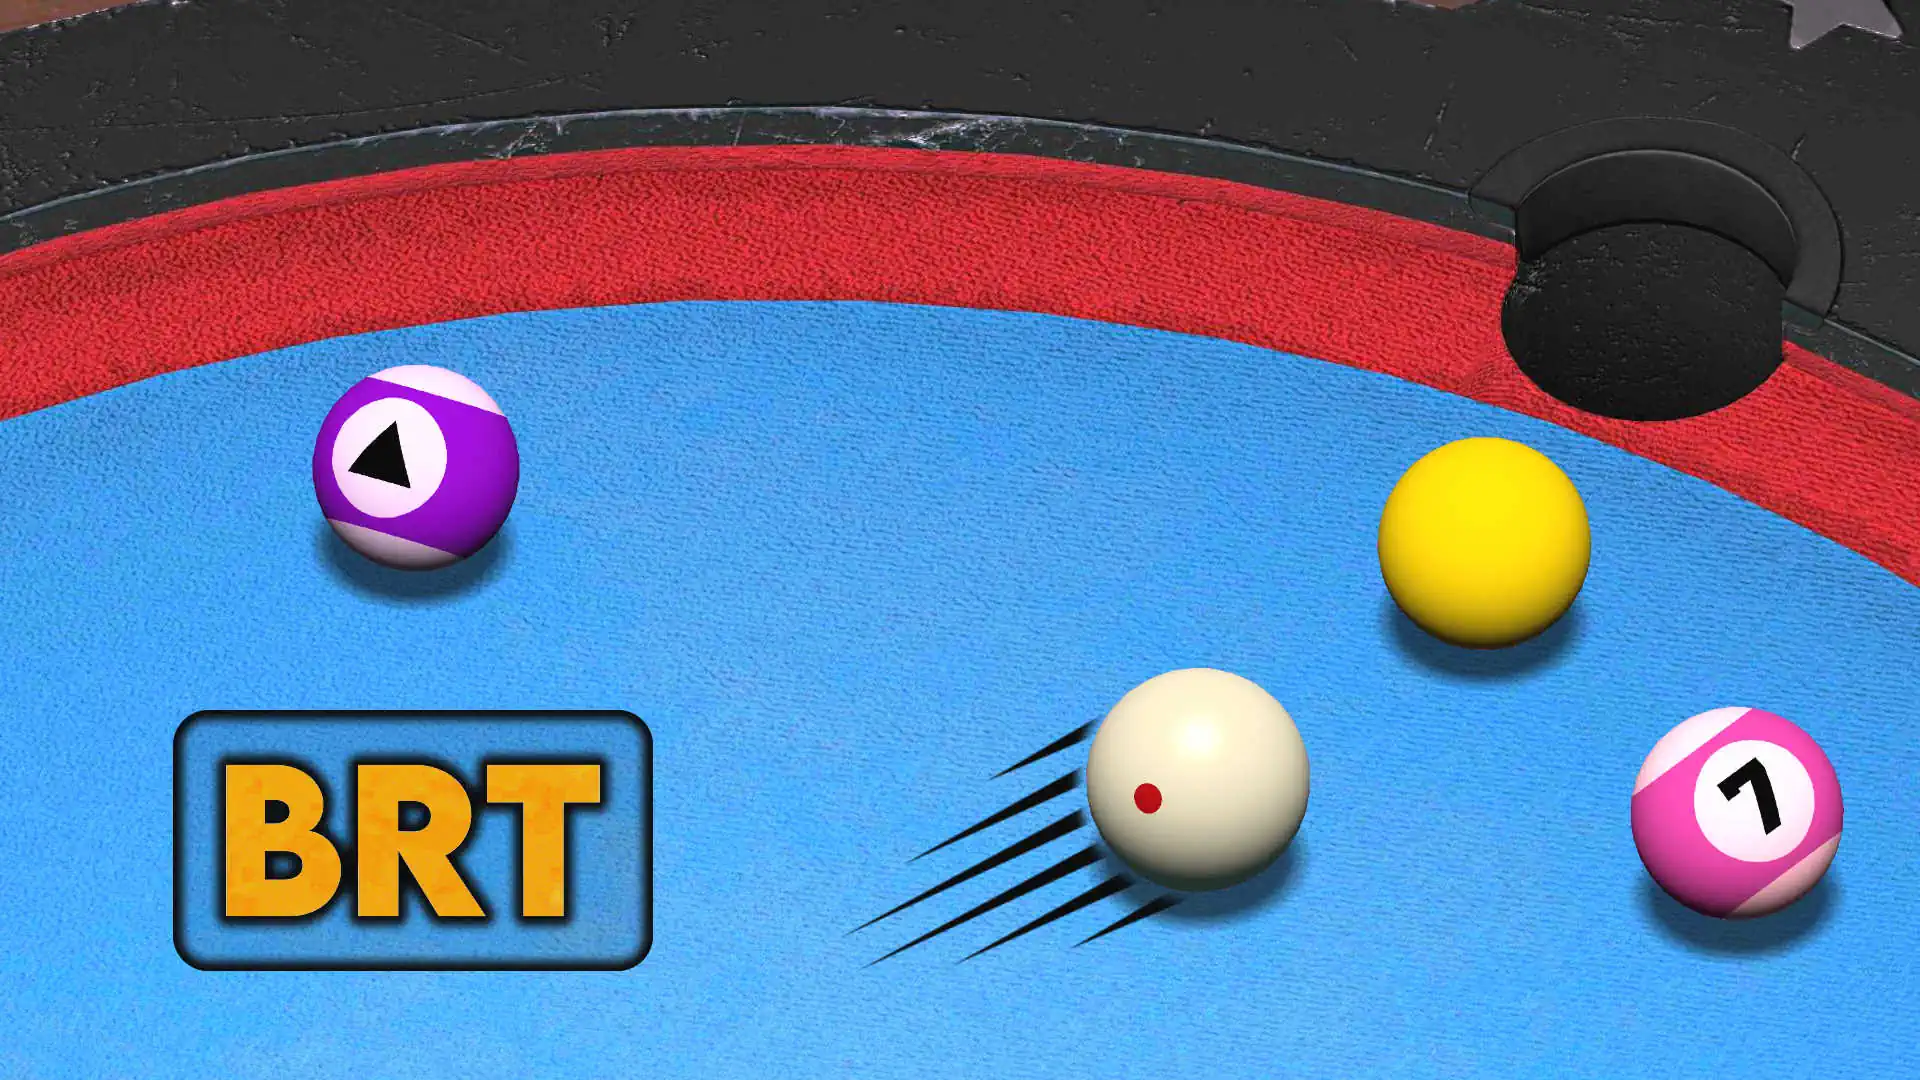 Billiards of the Round Table